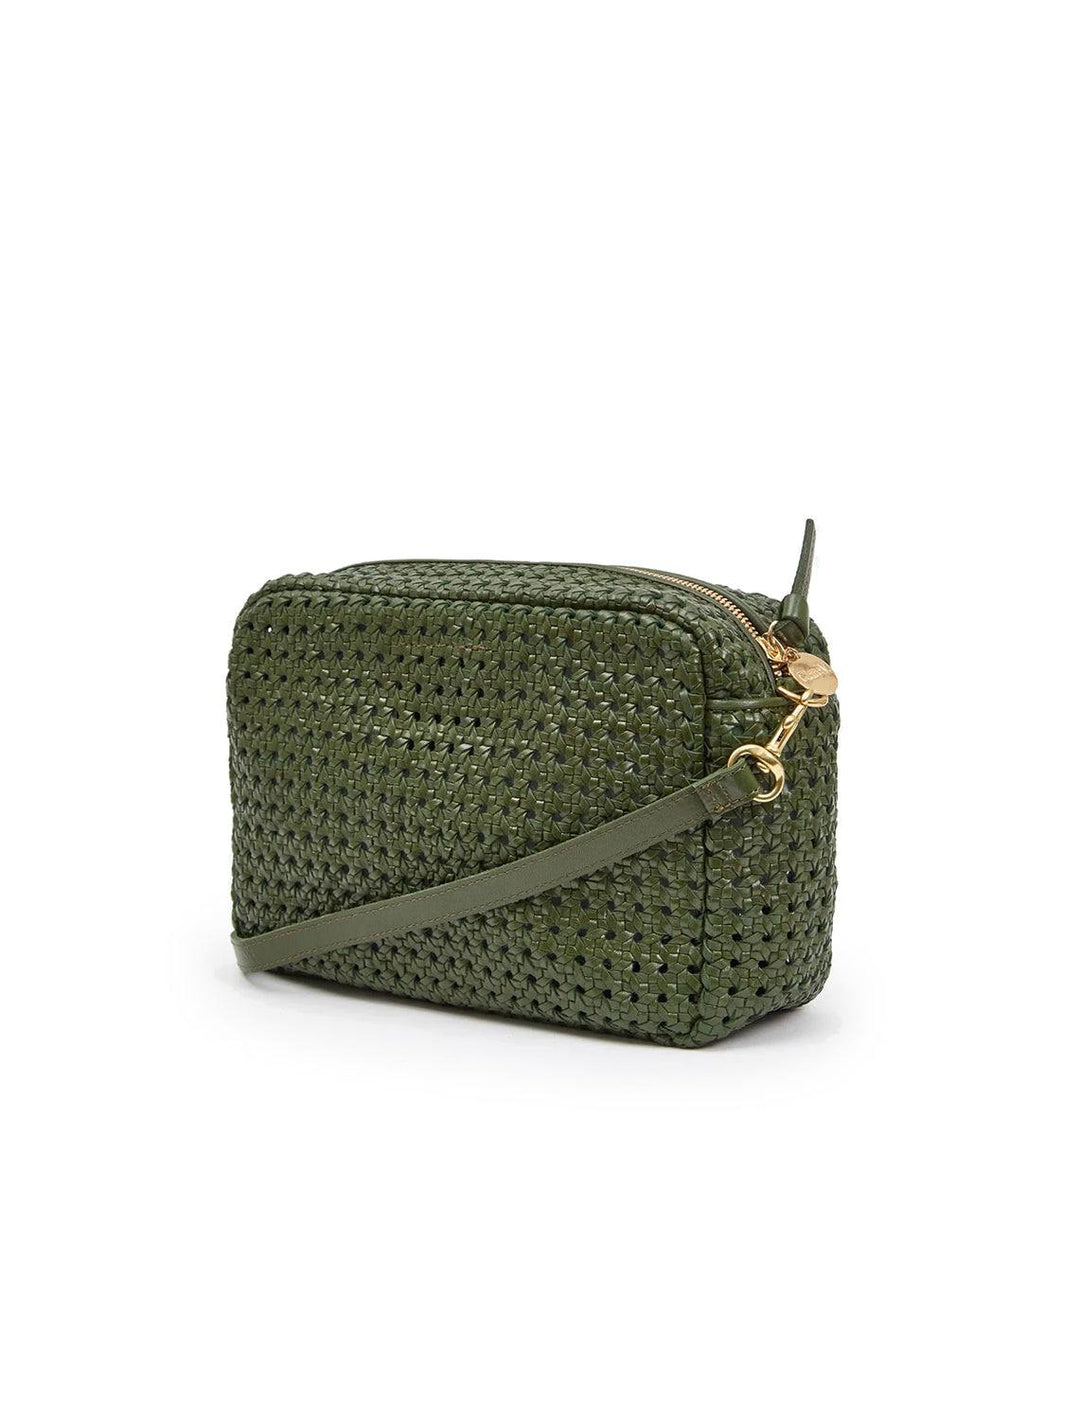 Side angle view of Clare V.'s marisol crossbody bag in army rattan.